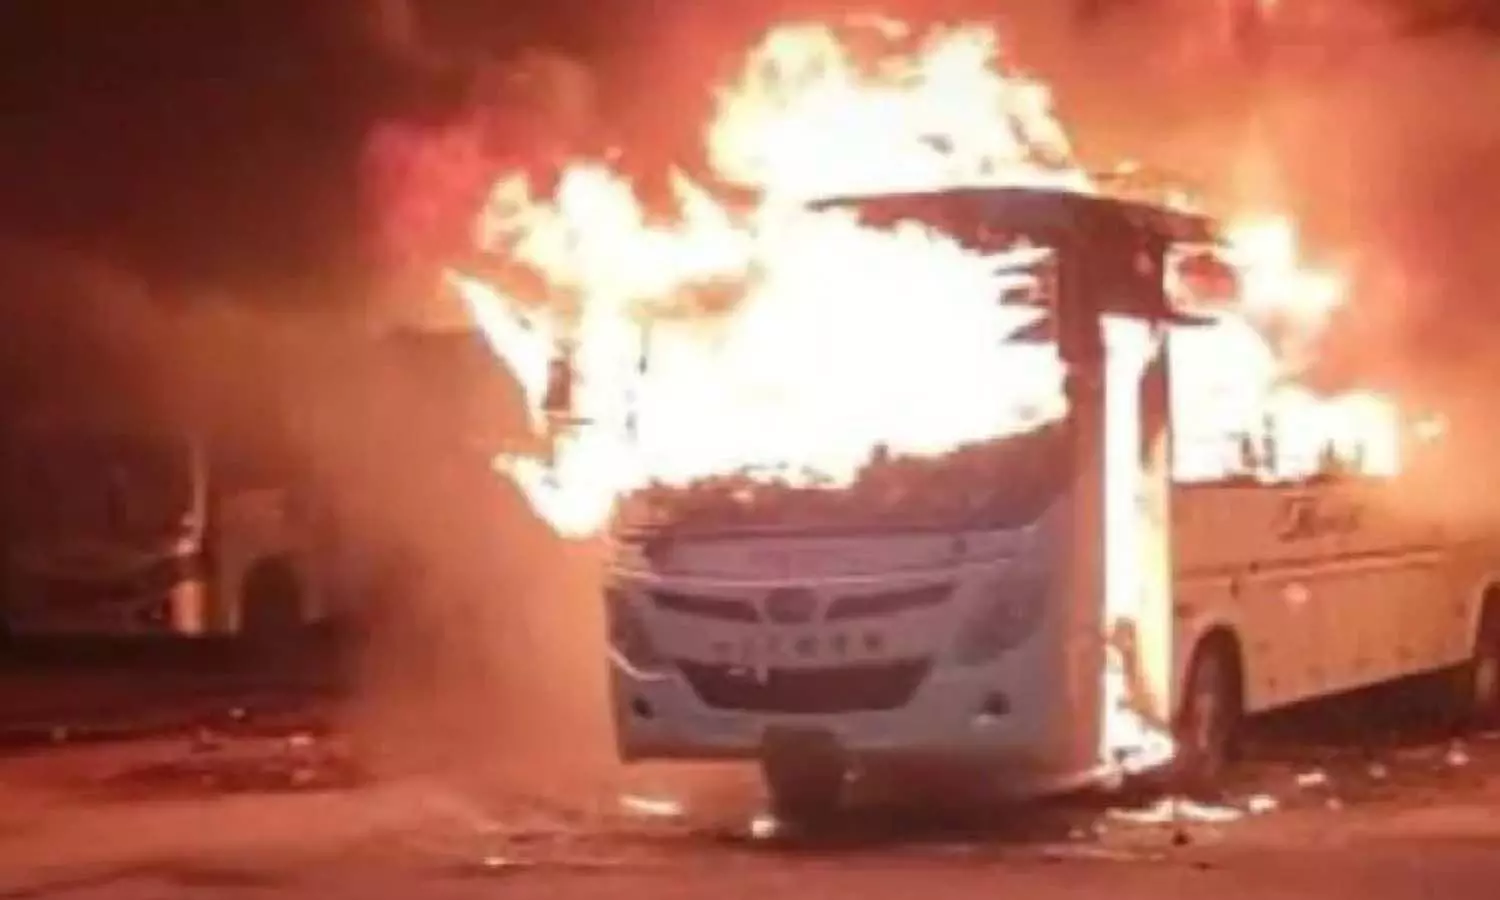 Accident at Ranchi Khadgarha bus stand, bus caught fire, driver-helper burnt to death